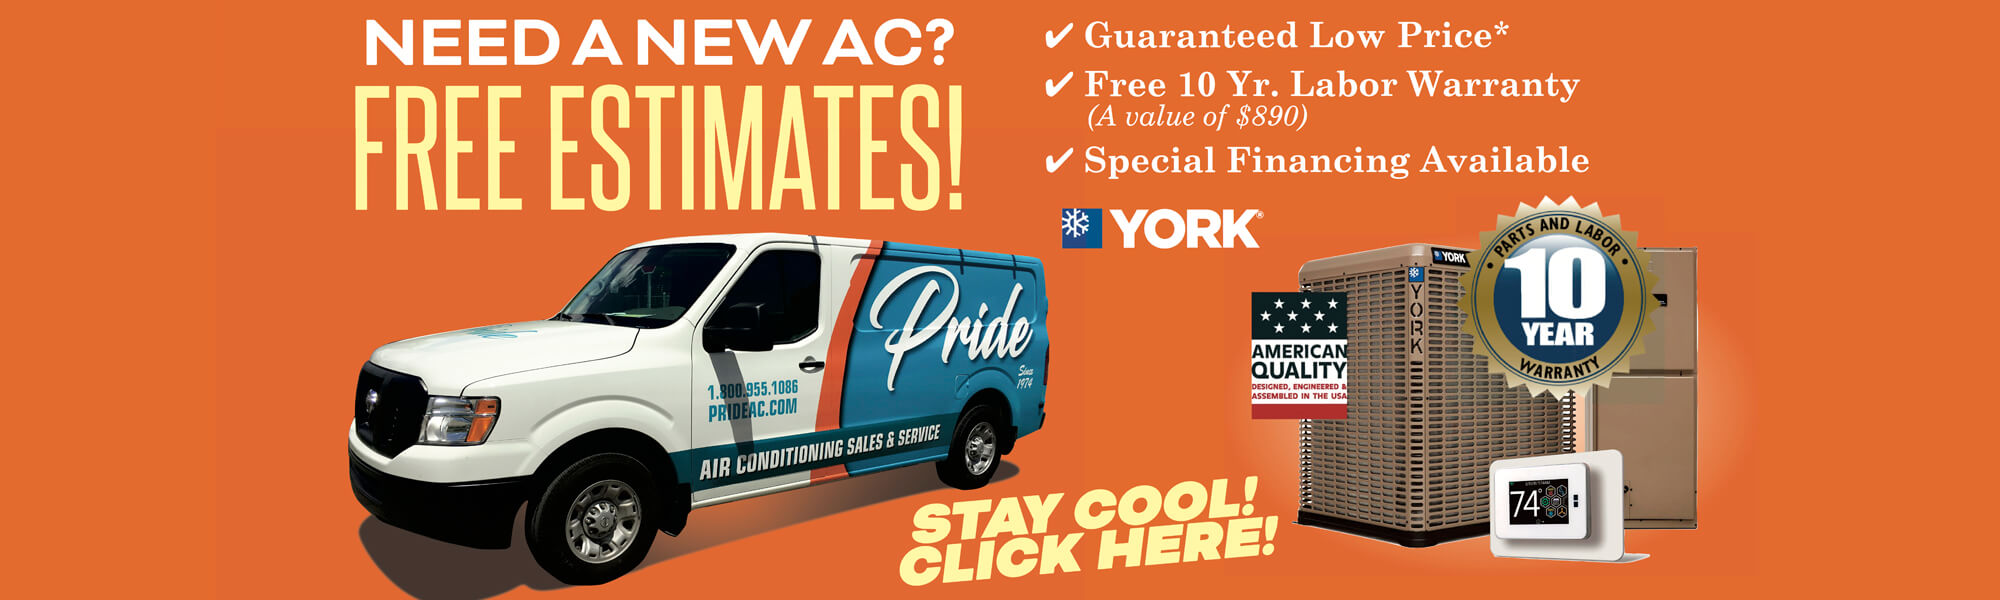 For a AC installation or repair estimate in Surnise FL, call today for a quote!